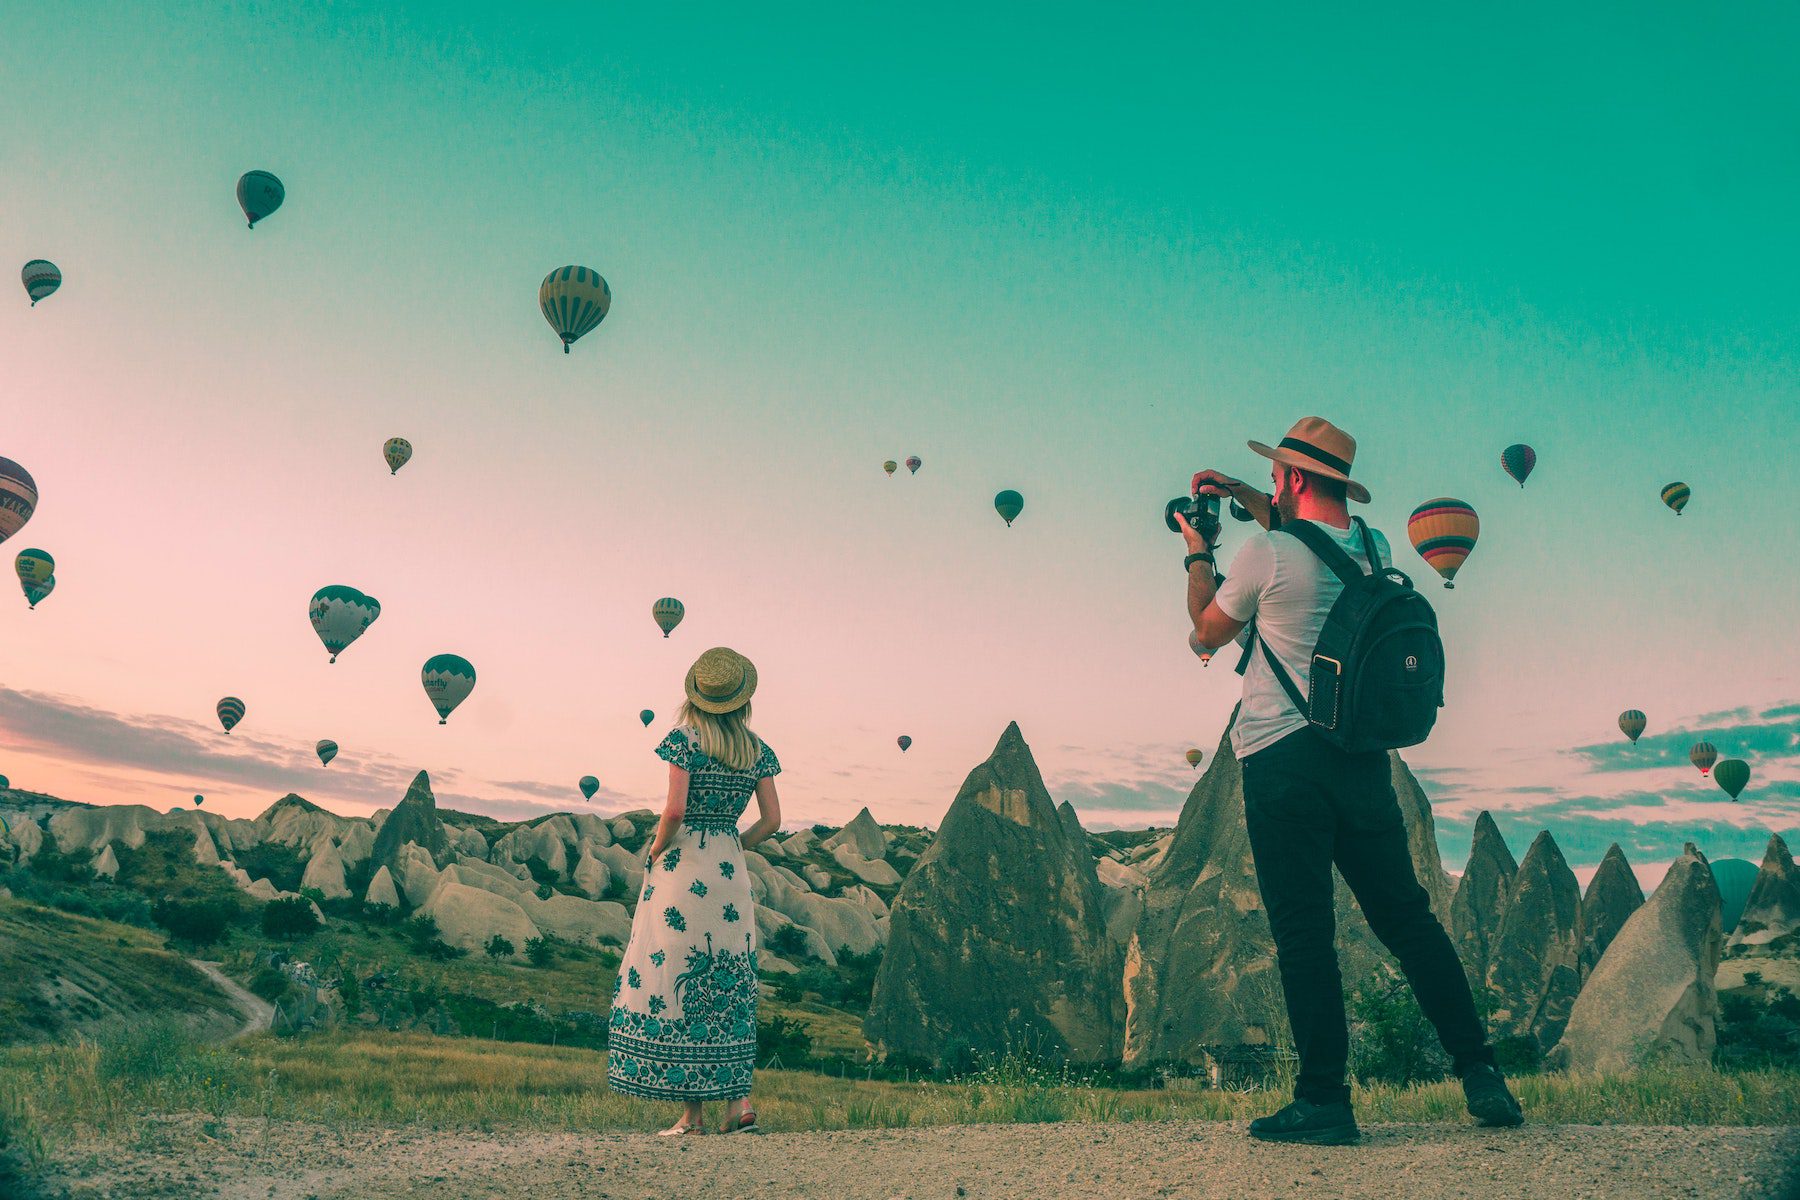 A man wearing a fedora, white t-shirt, and dark pants, photographs a woman in a blue and white dress as countless hot air balloons litter the sky above small sharp peaks